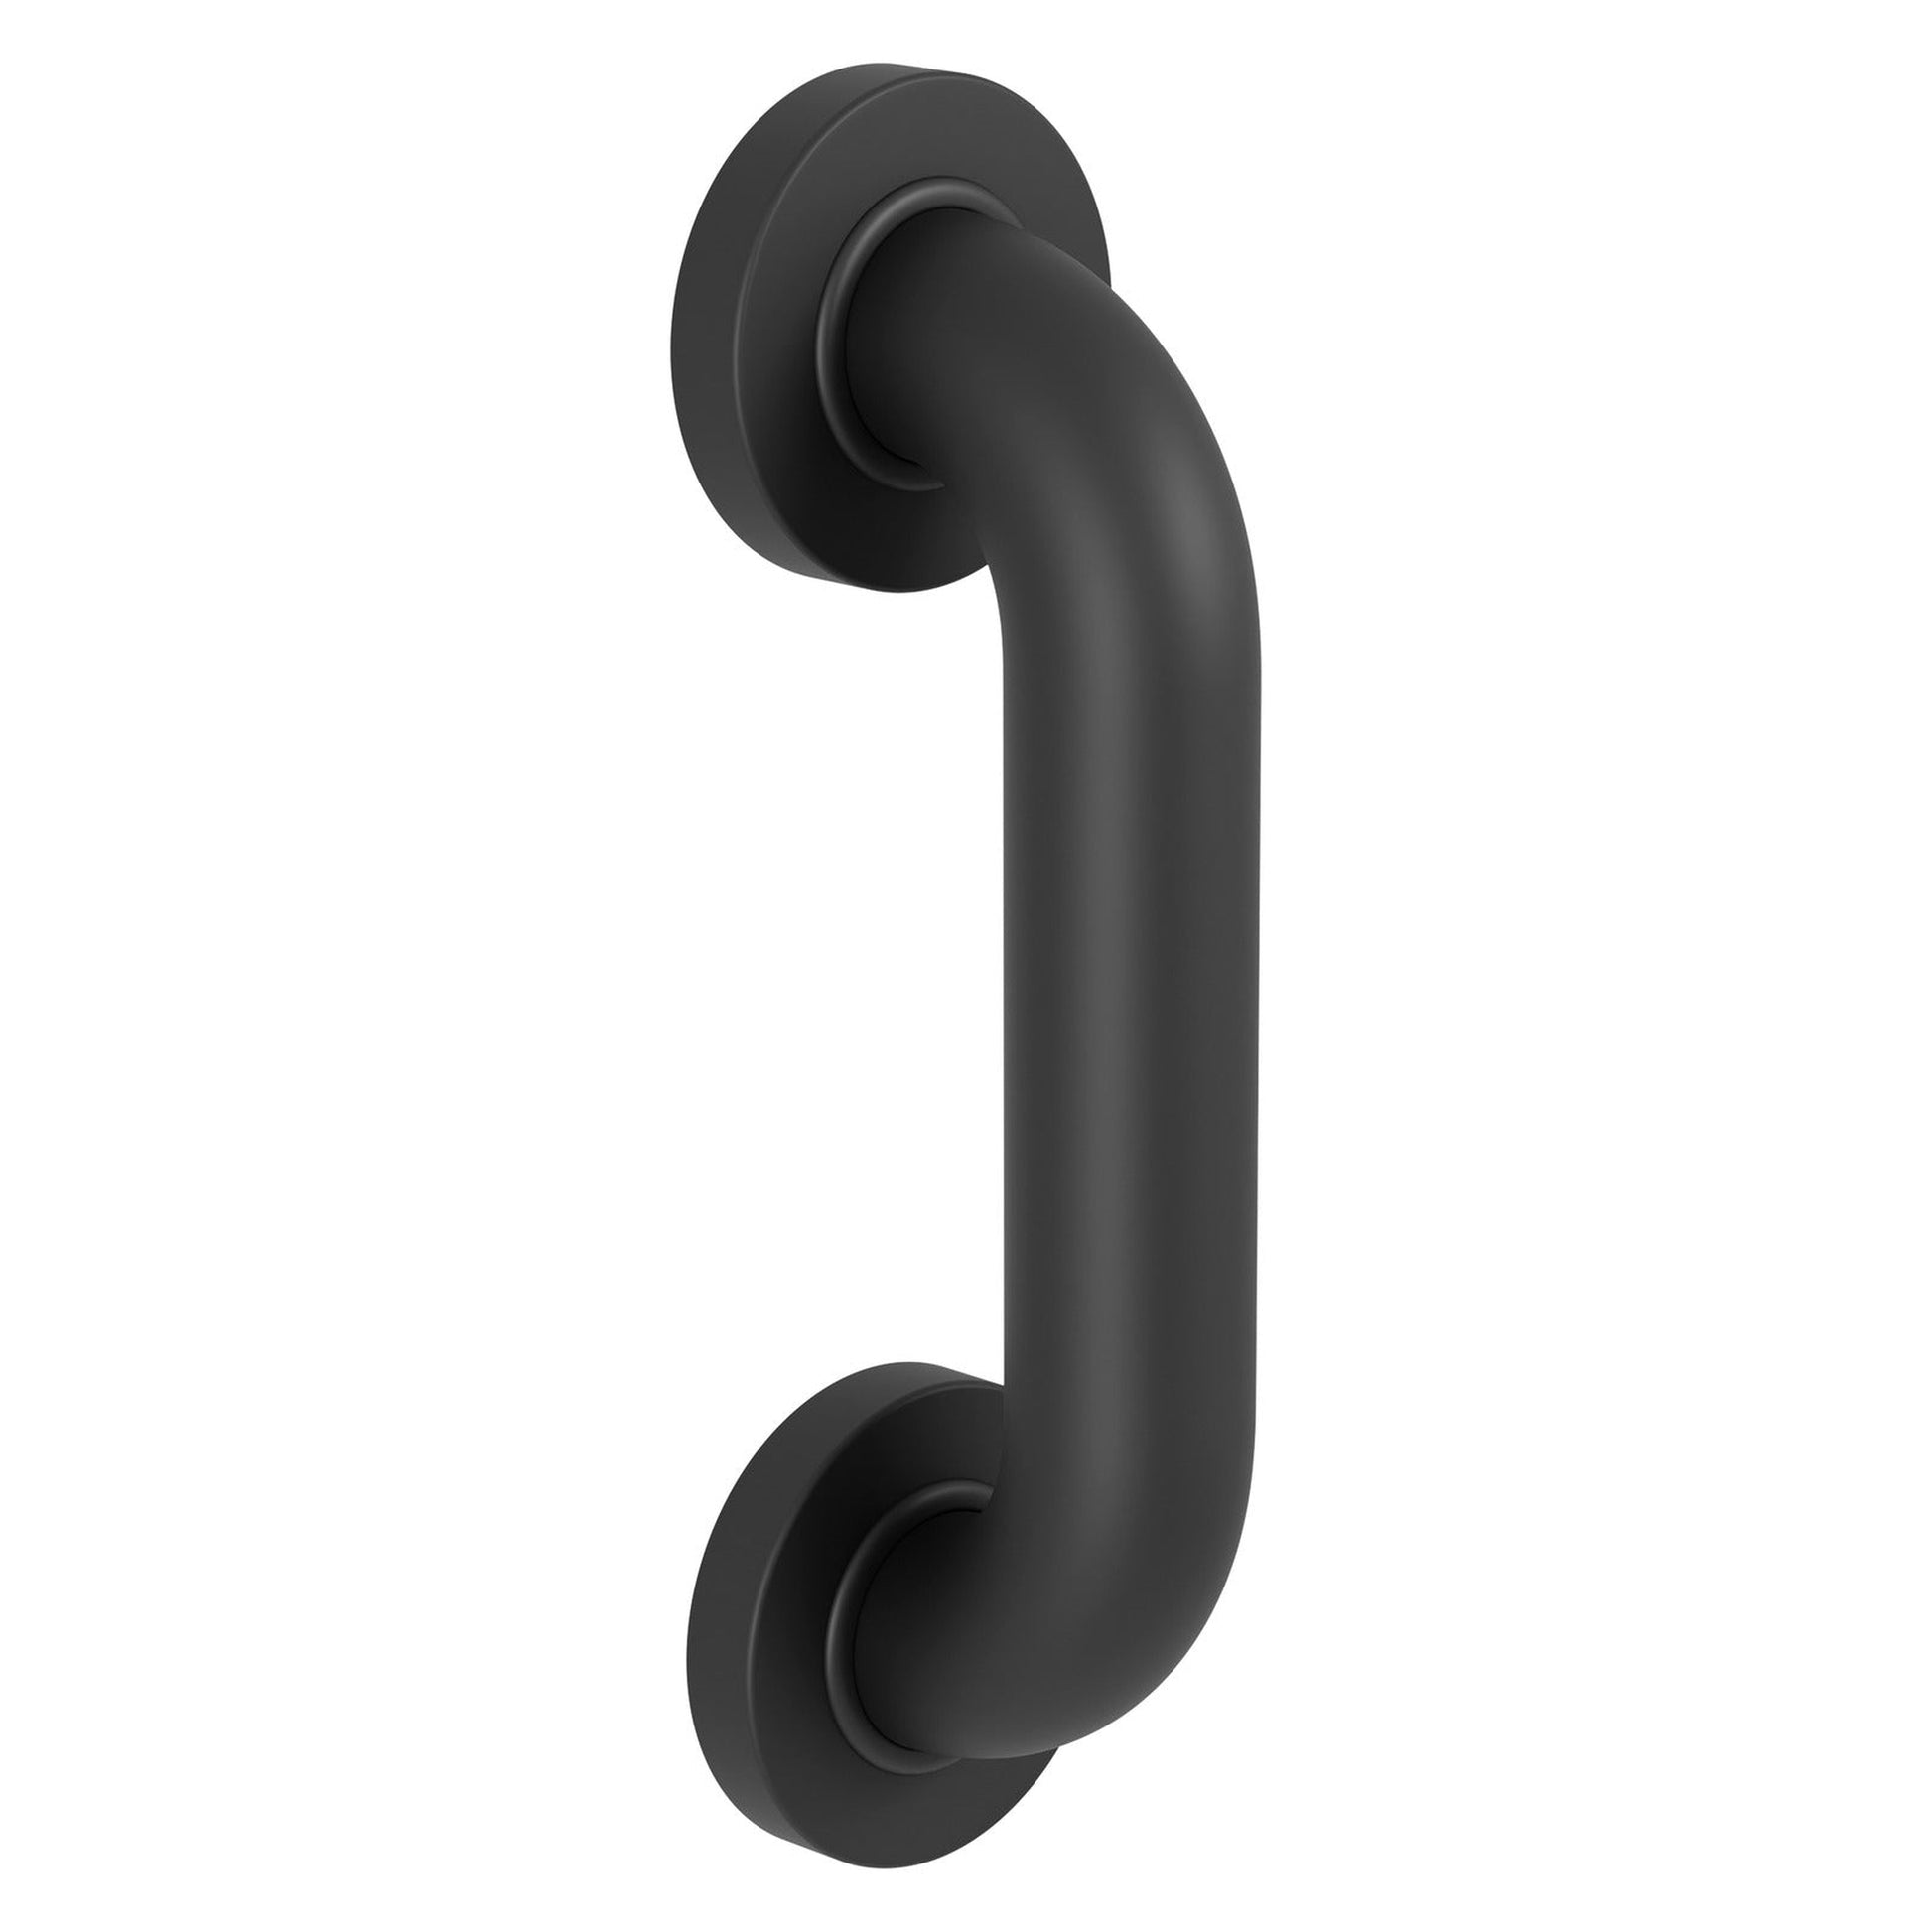 Evekare 8" x 1.5" Stainless Steel Concealed Mount Grab Bar in Matte Black